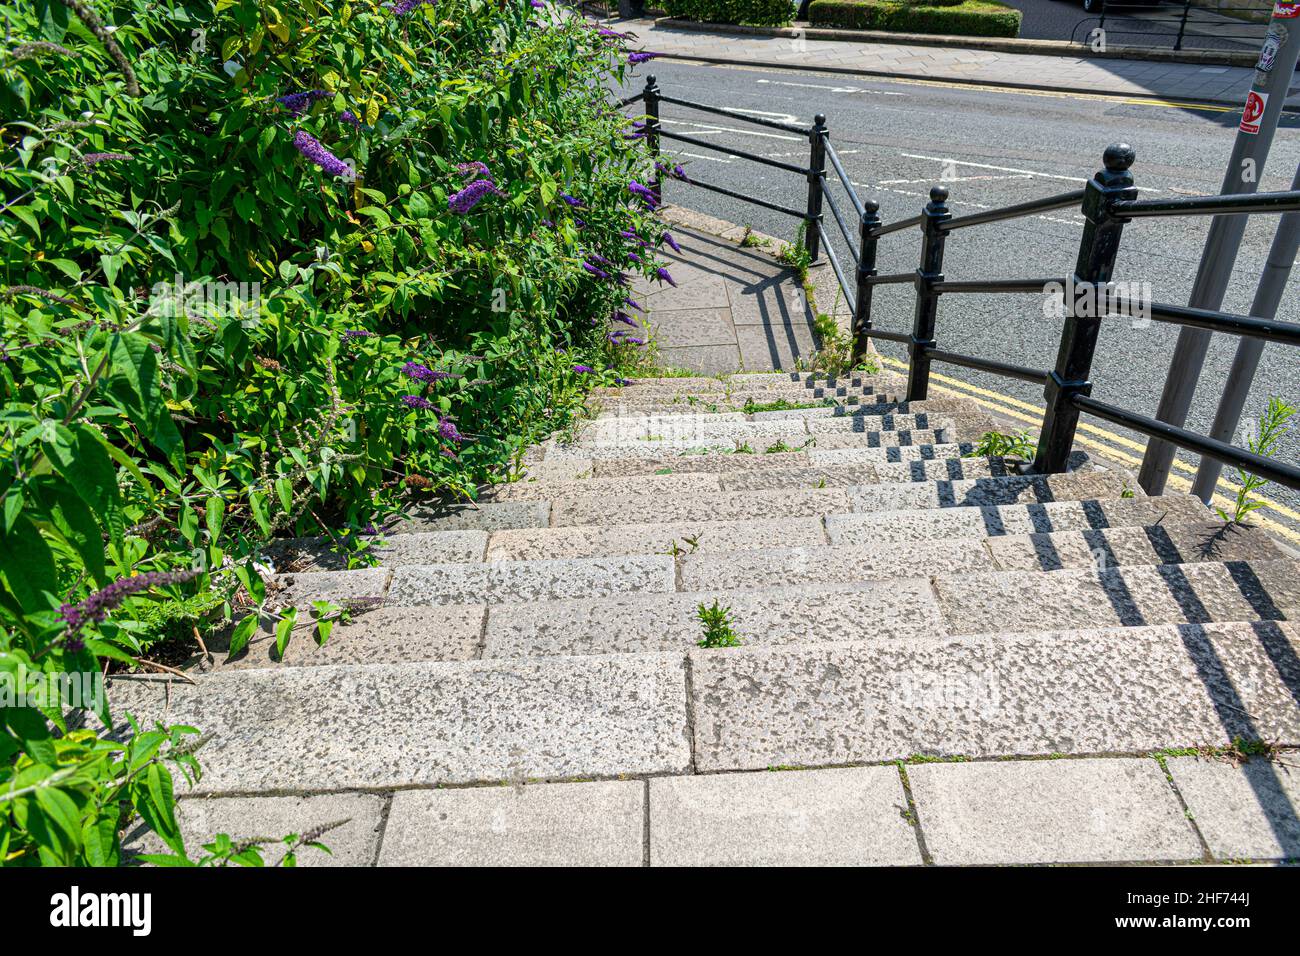 Beautiful stone and concrete steps leading down onto the pavement sidewalk. Flowering Liriope muscari, Liliturf, and leaves framing the image. Space f Stock Photo